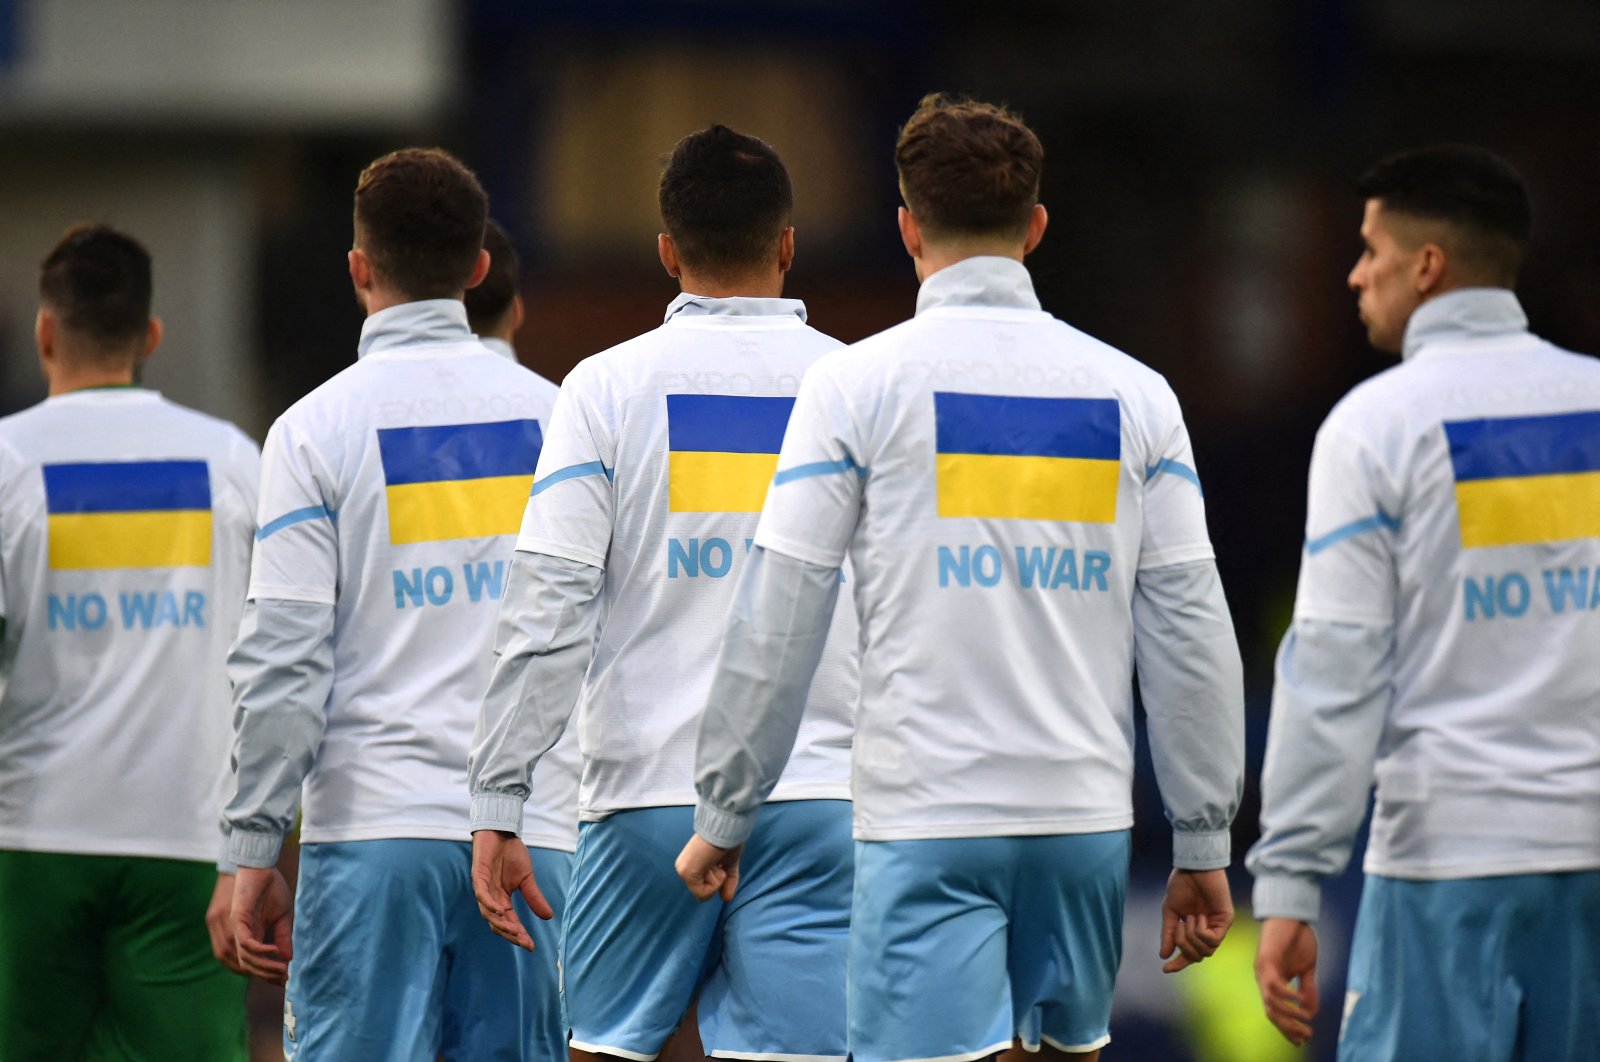 Manchester City players wear t-shirts in support of Ukraine before a Premier League match against Everton, Liverpool, Feb. 26, 2022. (Reuters Photo)